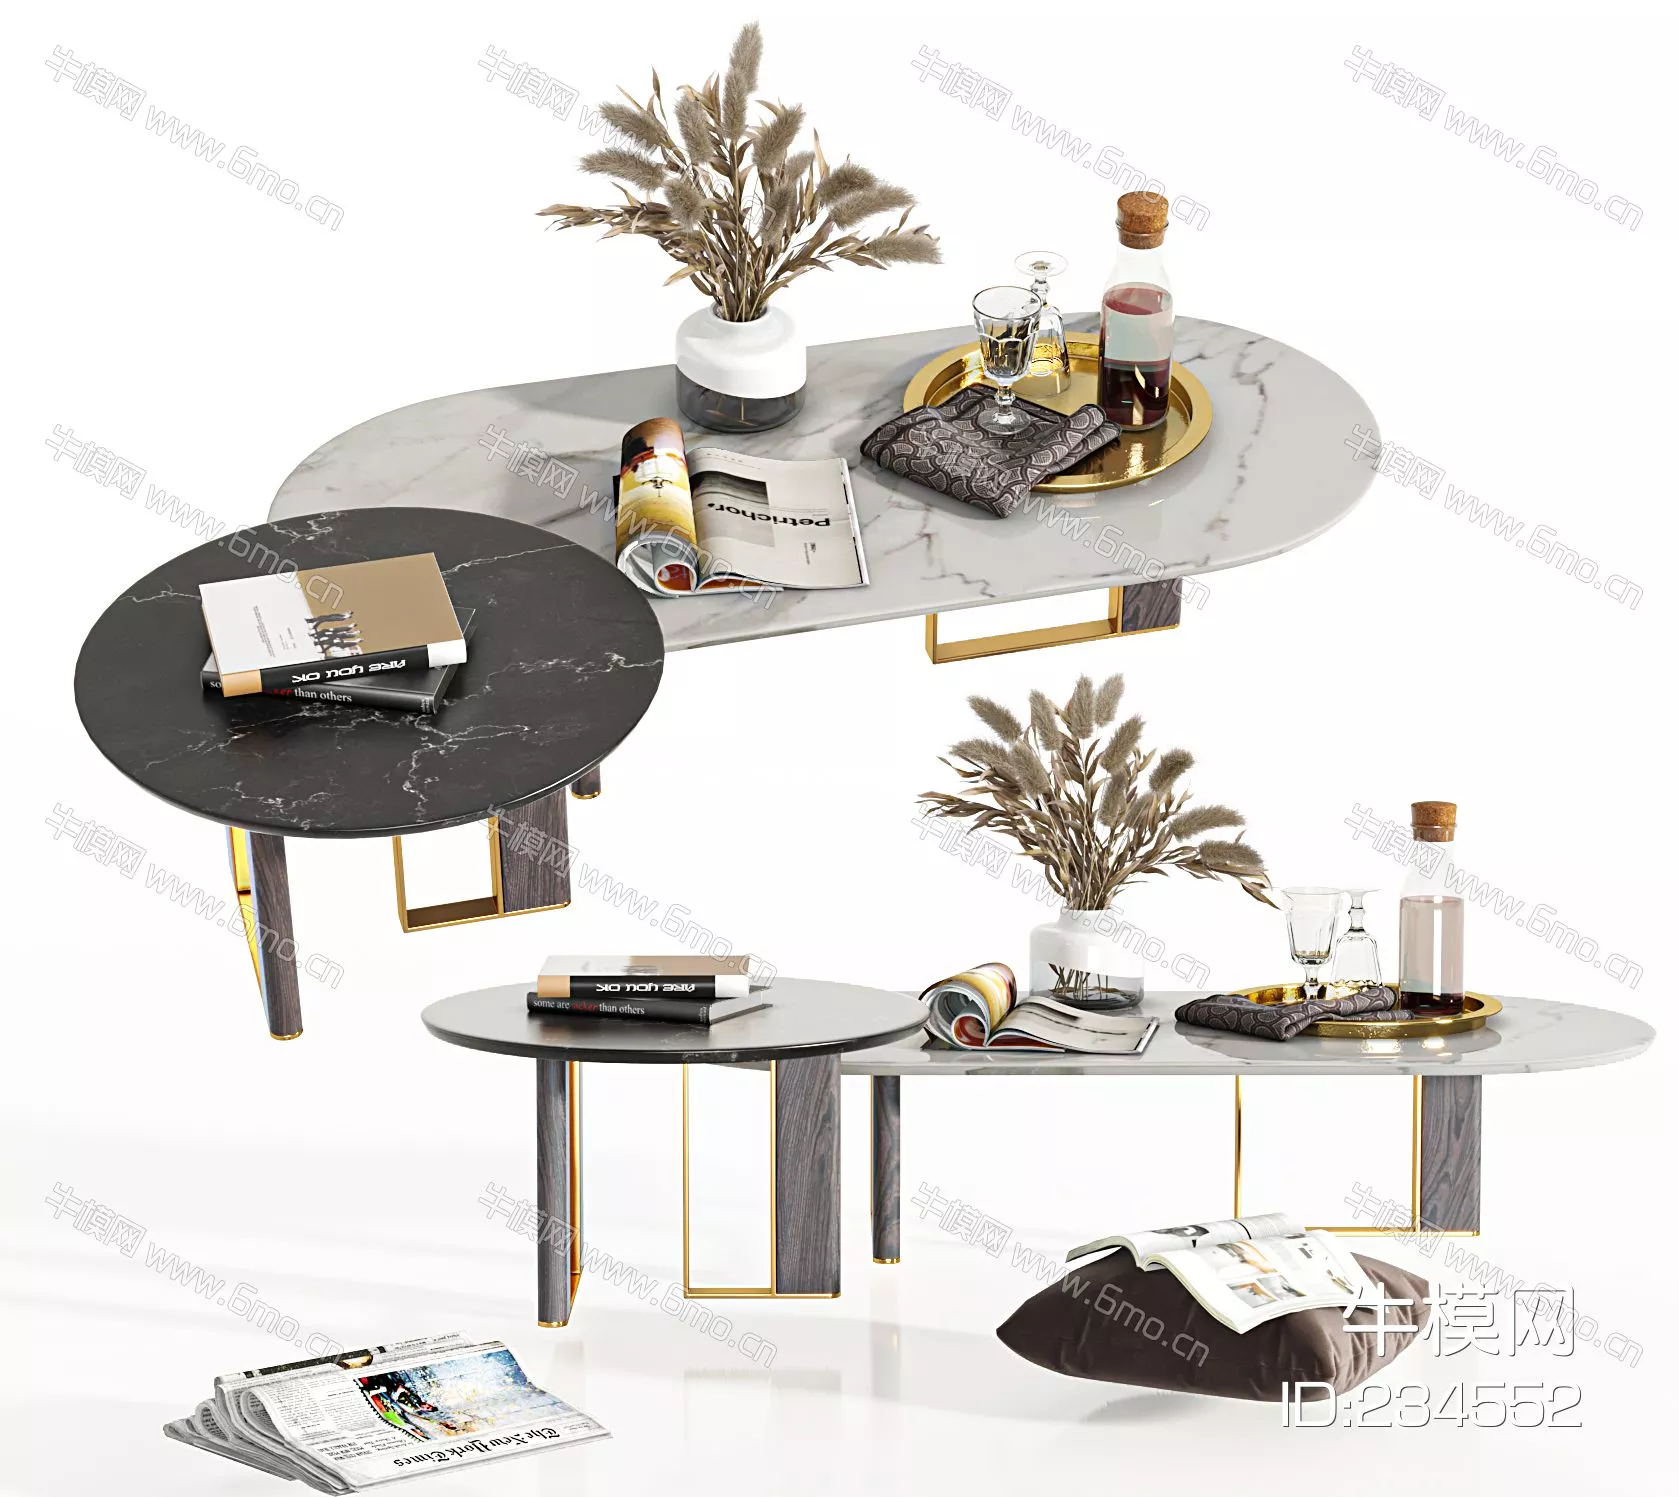 MODERN COFFEE TABLE - SKETCHUP 3D MODEL - VRAY - 234552